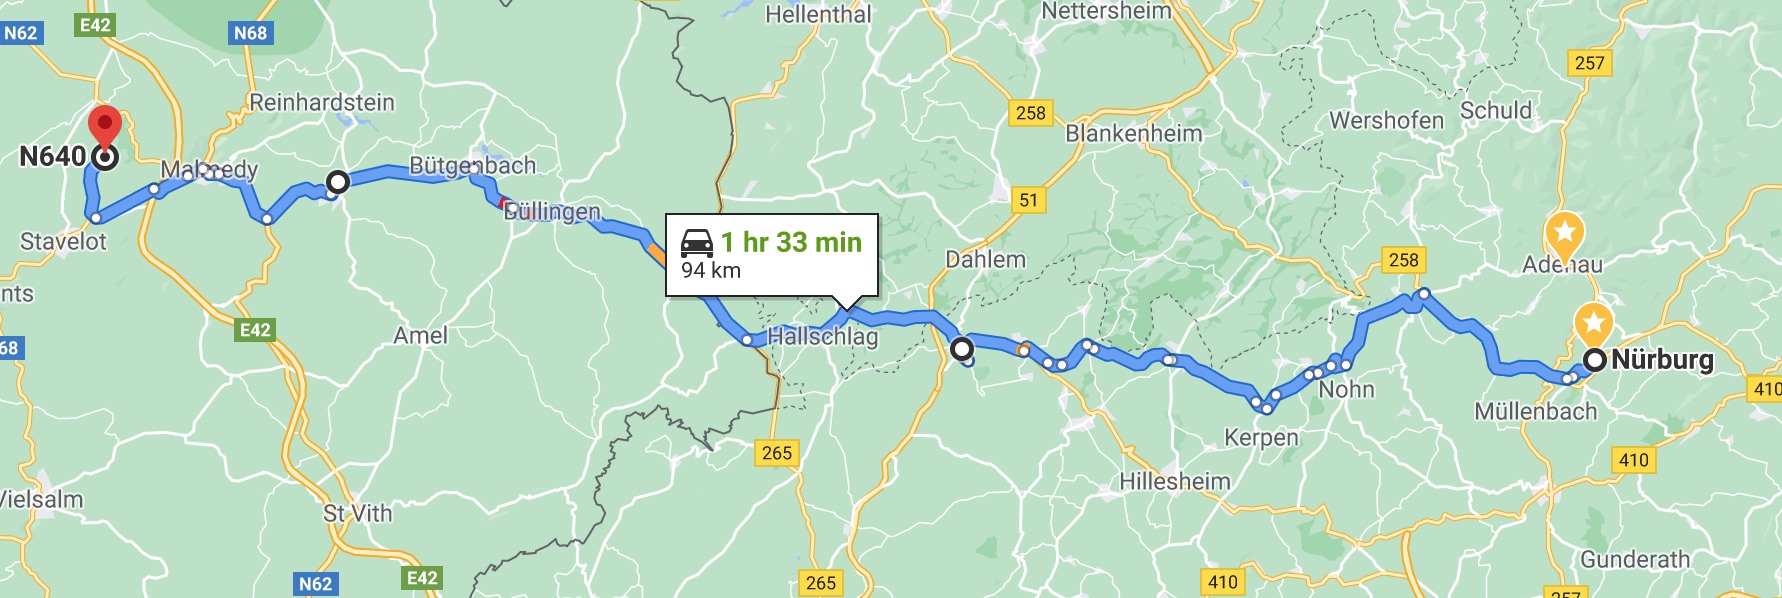 Nürburg to Spa, the shortest route